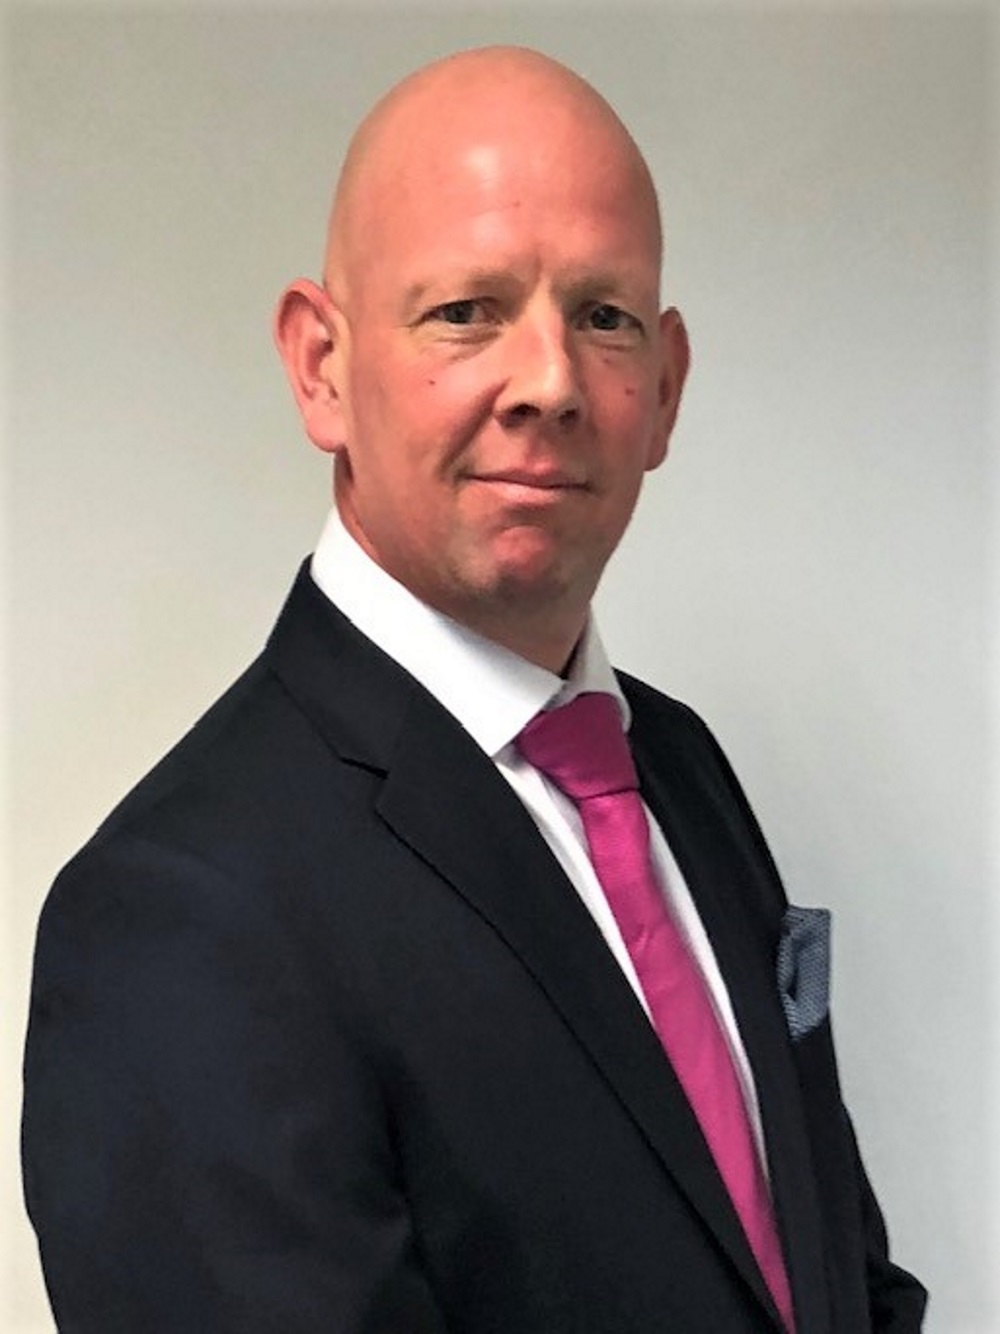 Andy Hooper - General Manager - Cheshire Oaks Hyundai